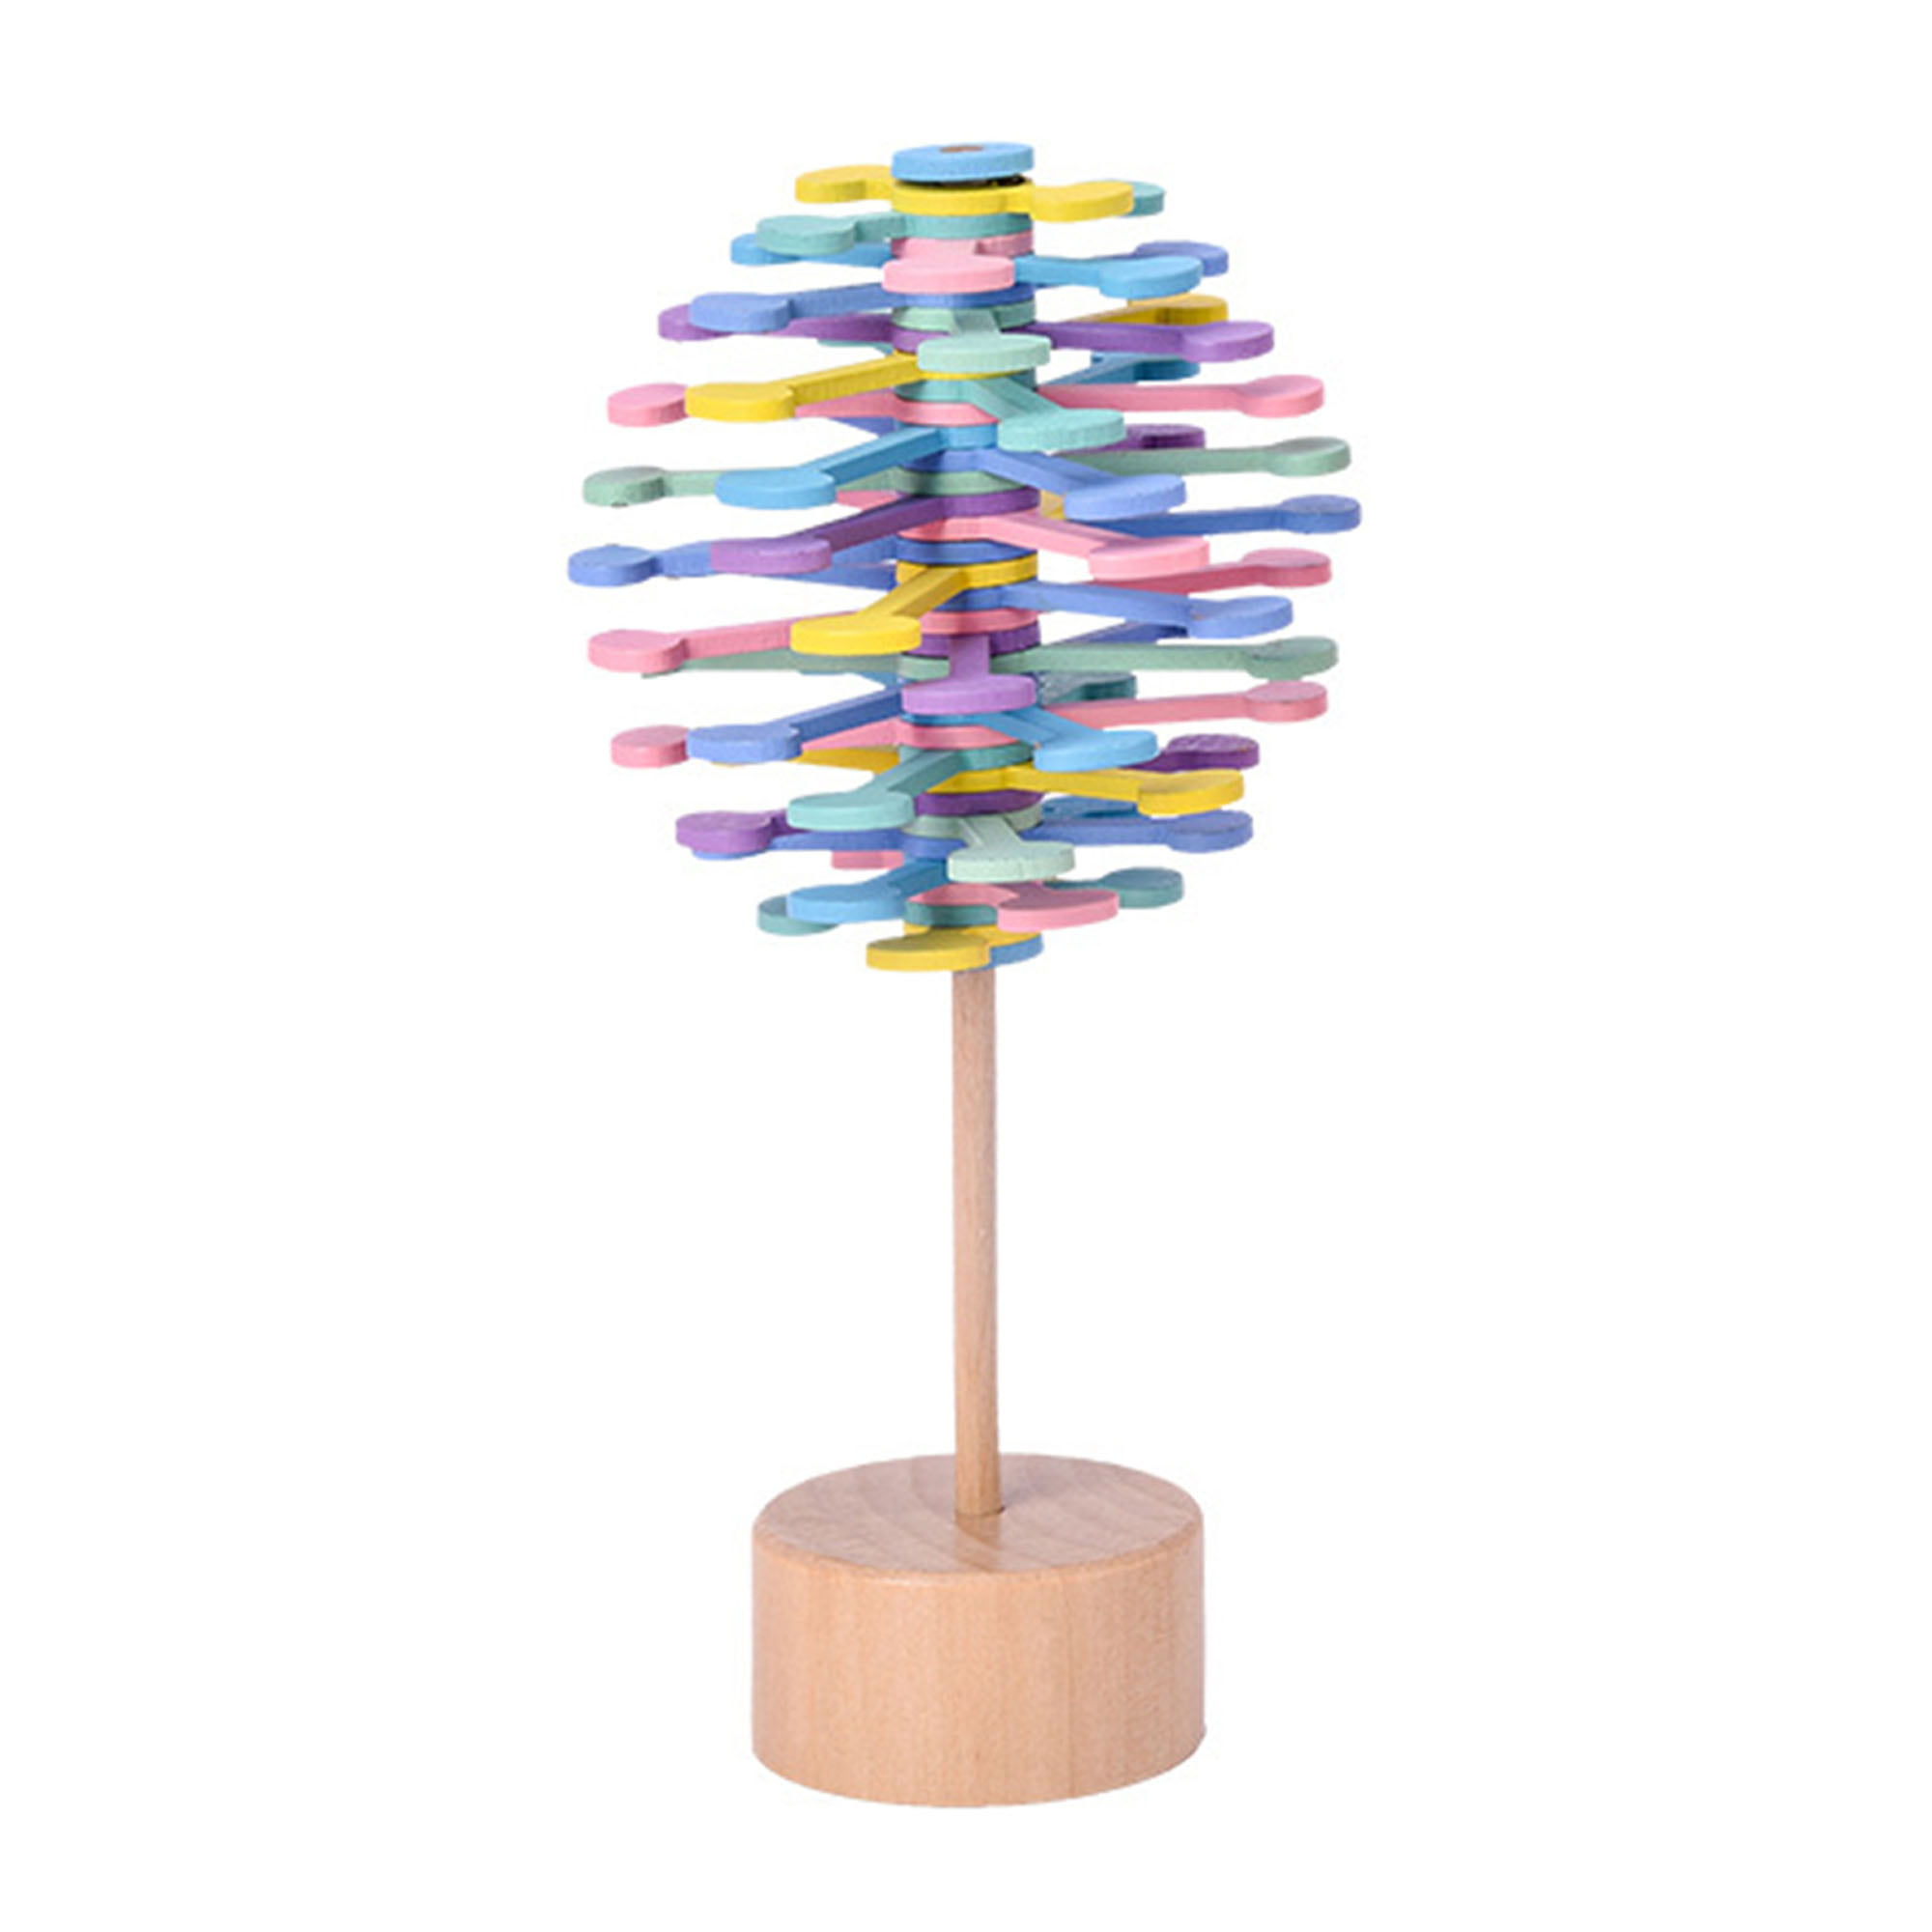 Colorful Wooden Rotating Lollipop Sensory Relaxation Toy Home Desk Decor 